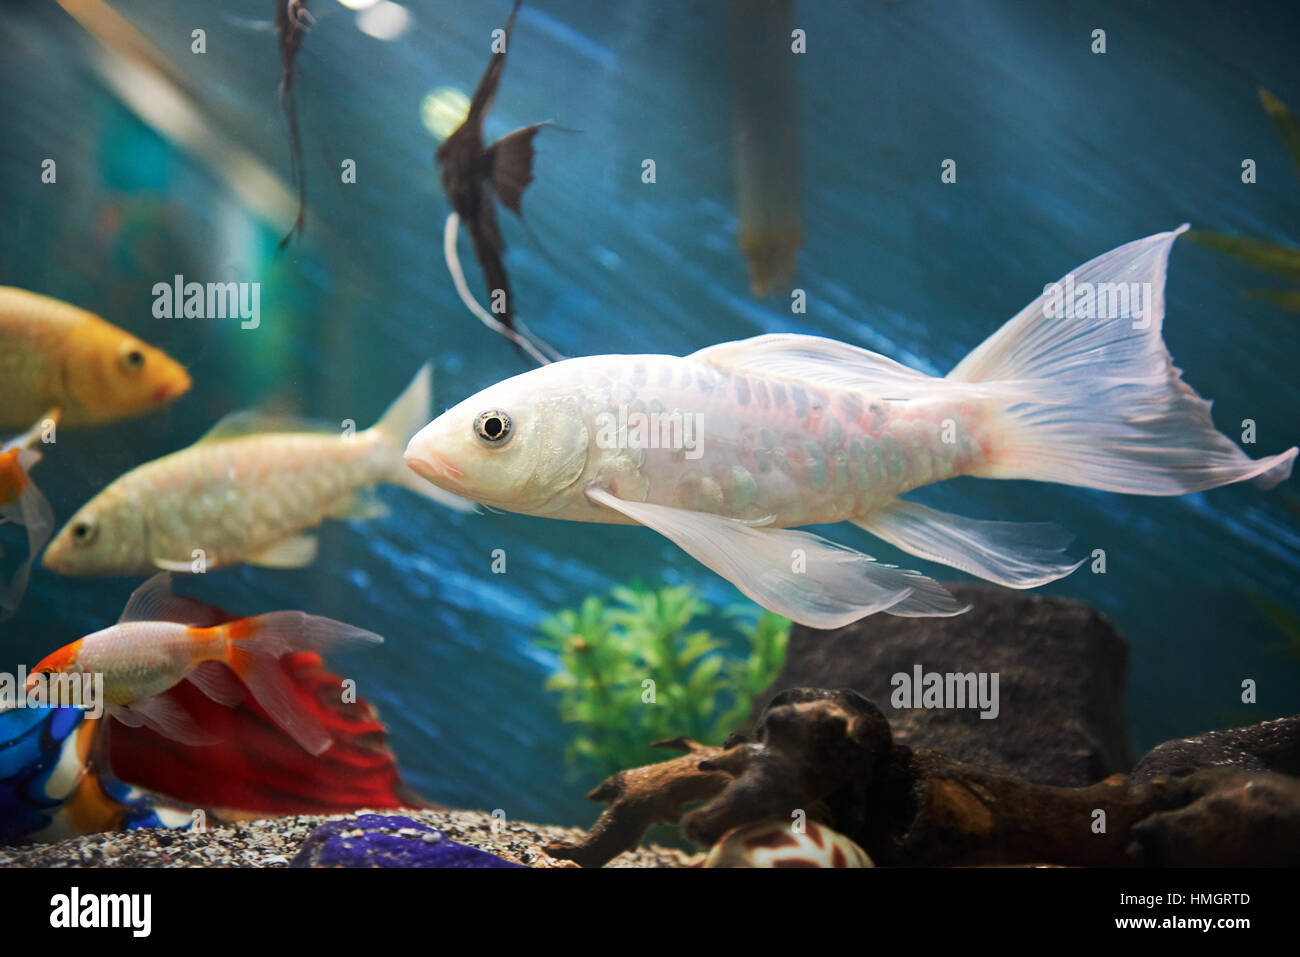 white fish in colorful blue aquarium with other fishes Stock Photo